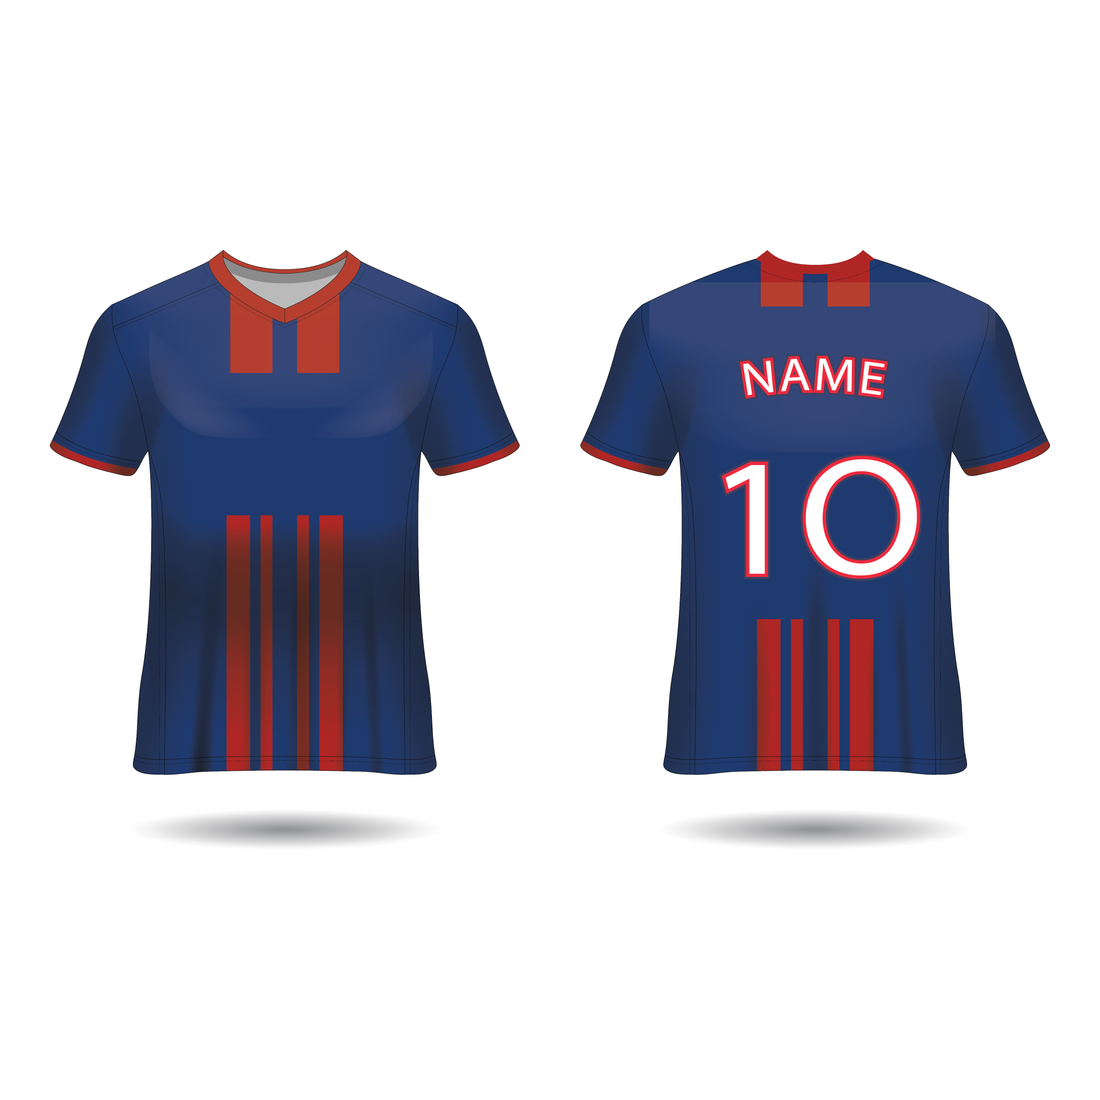 NEXT PRINT All Over Printed Customized Sublimation T-Shirt Unisex Sports Jersey Player Name & Number, Team Name NP50000252